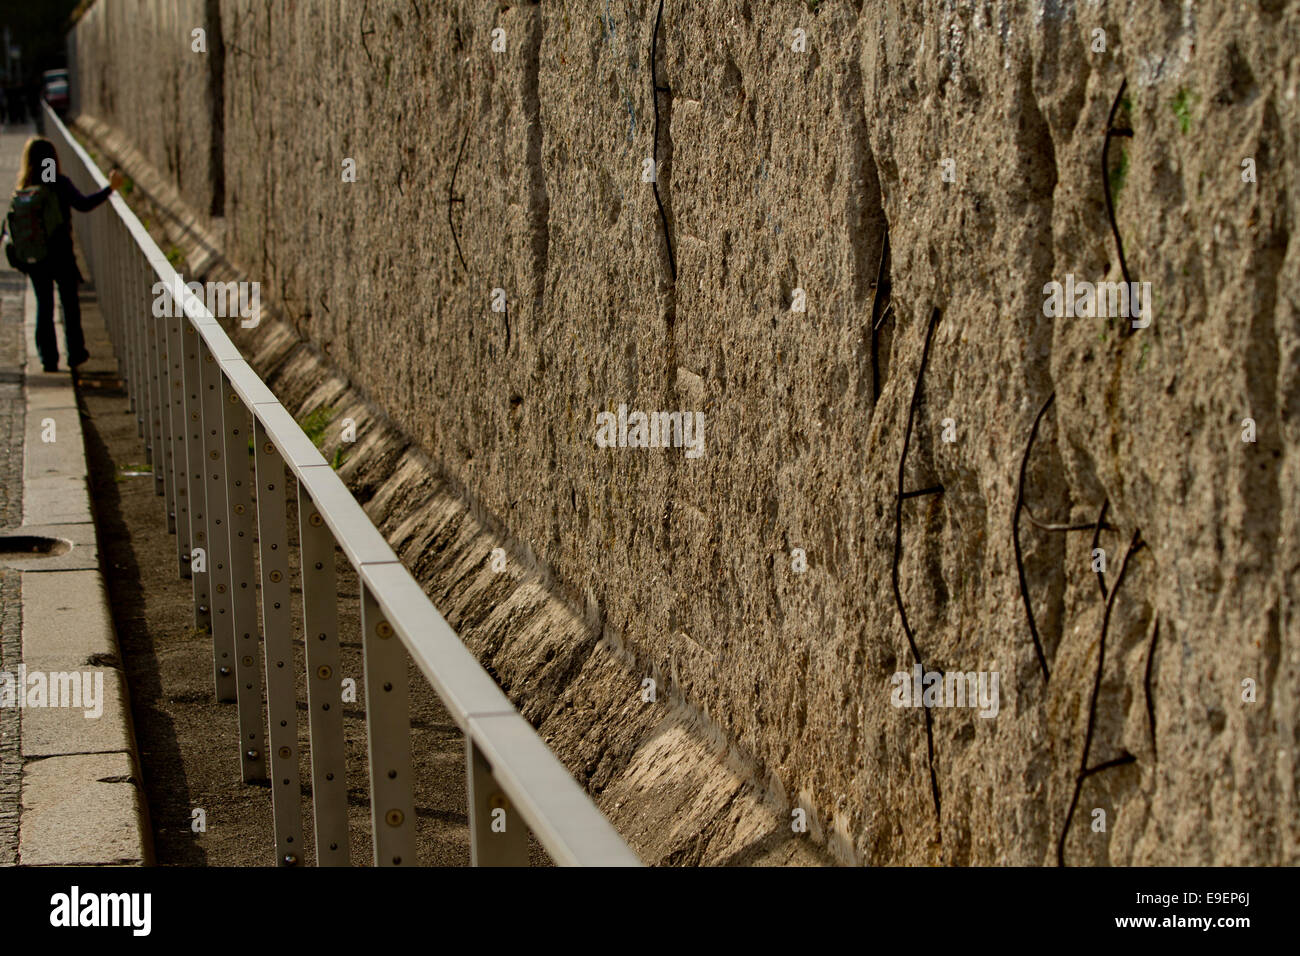 Berlin Wall railing person looking exposed stone Stock Photo